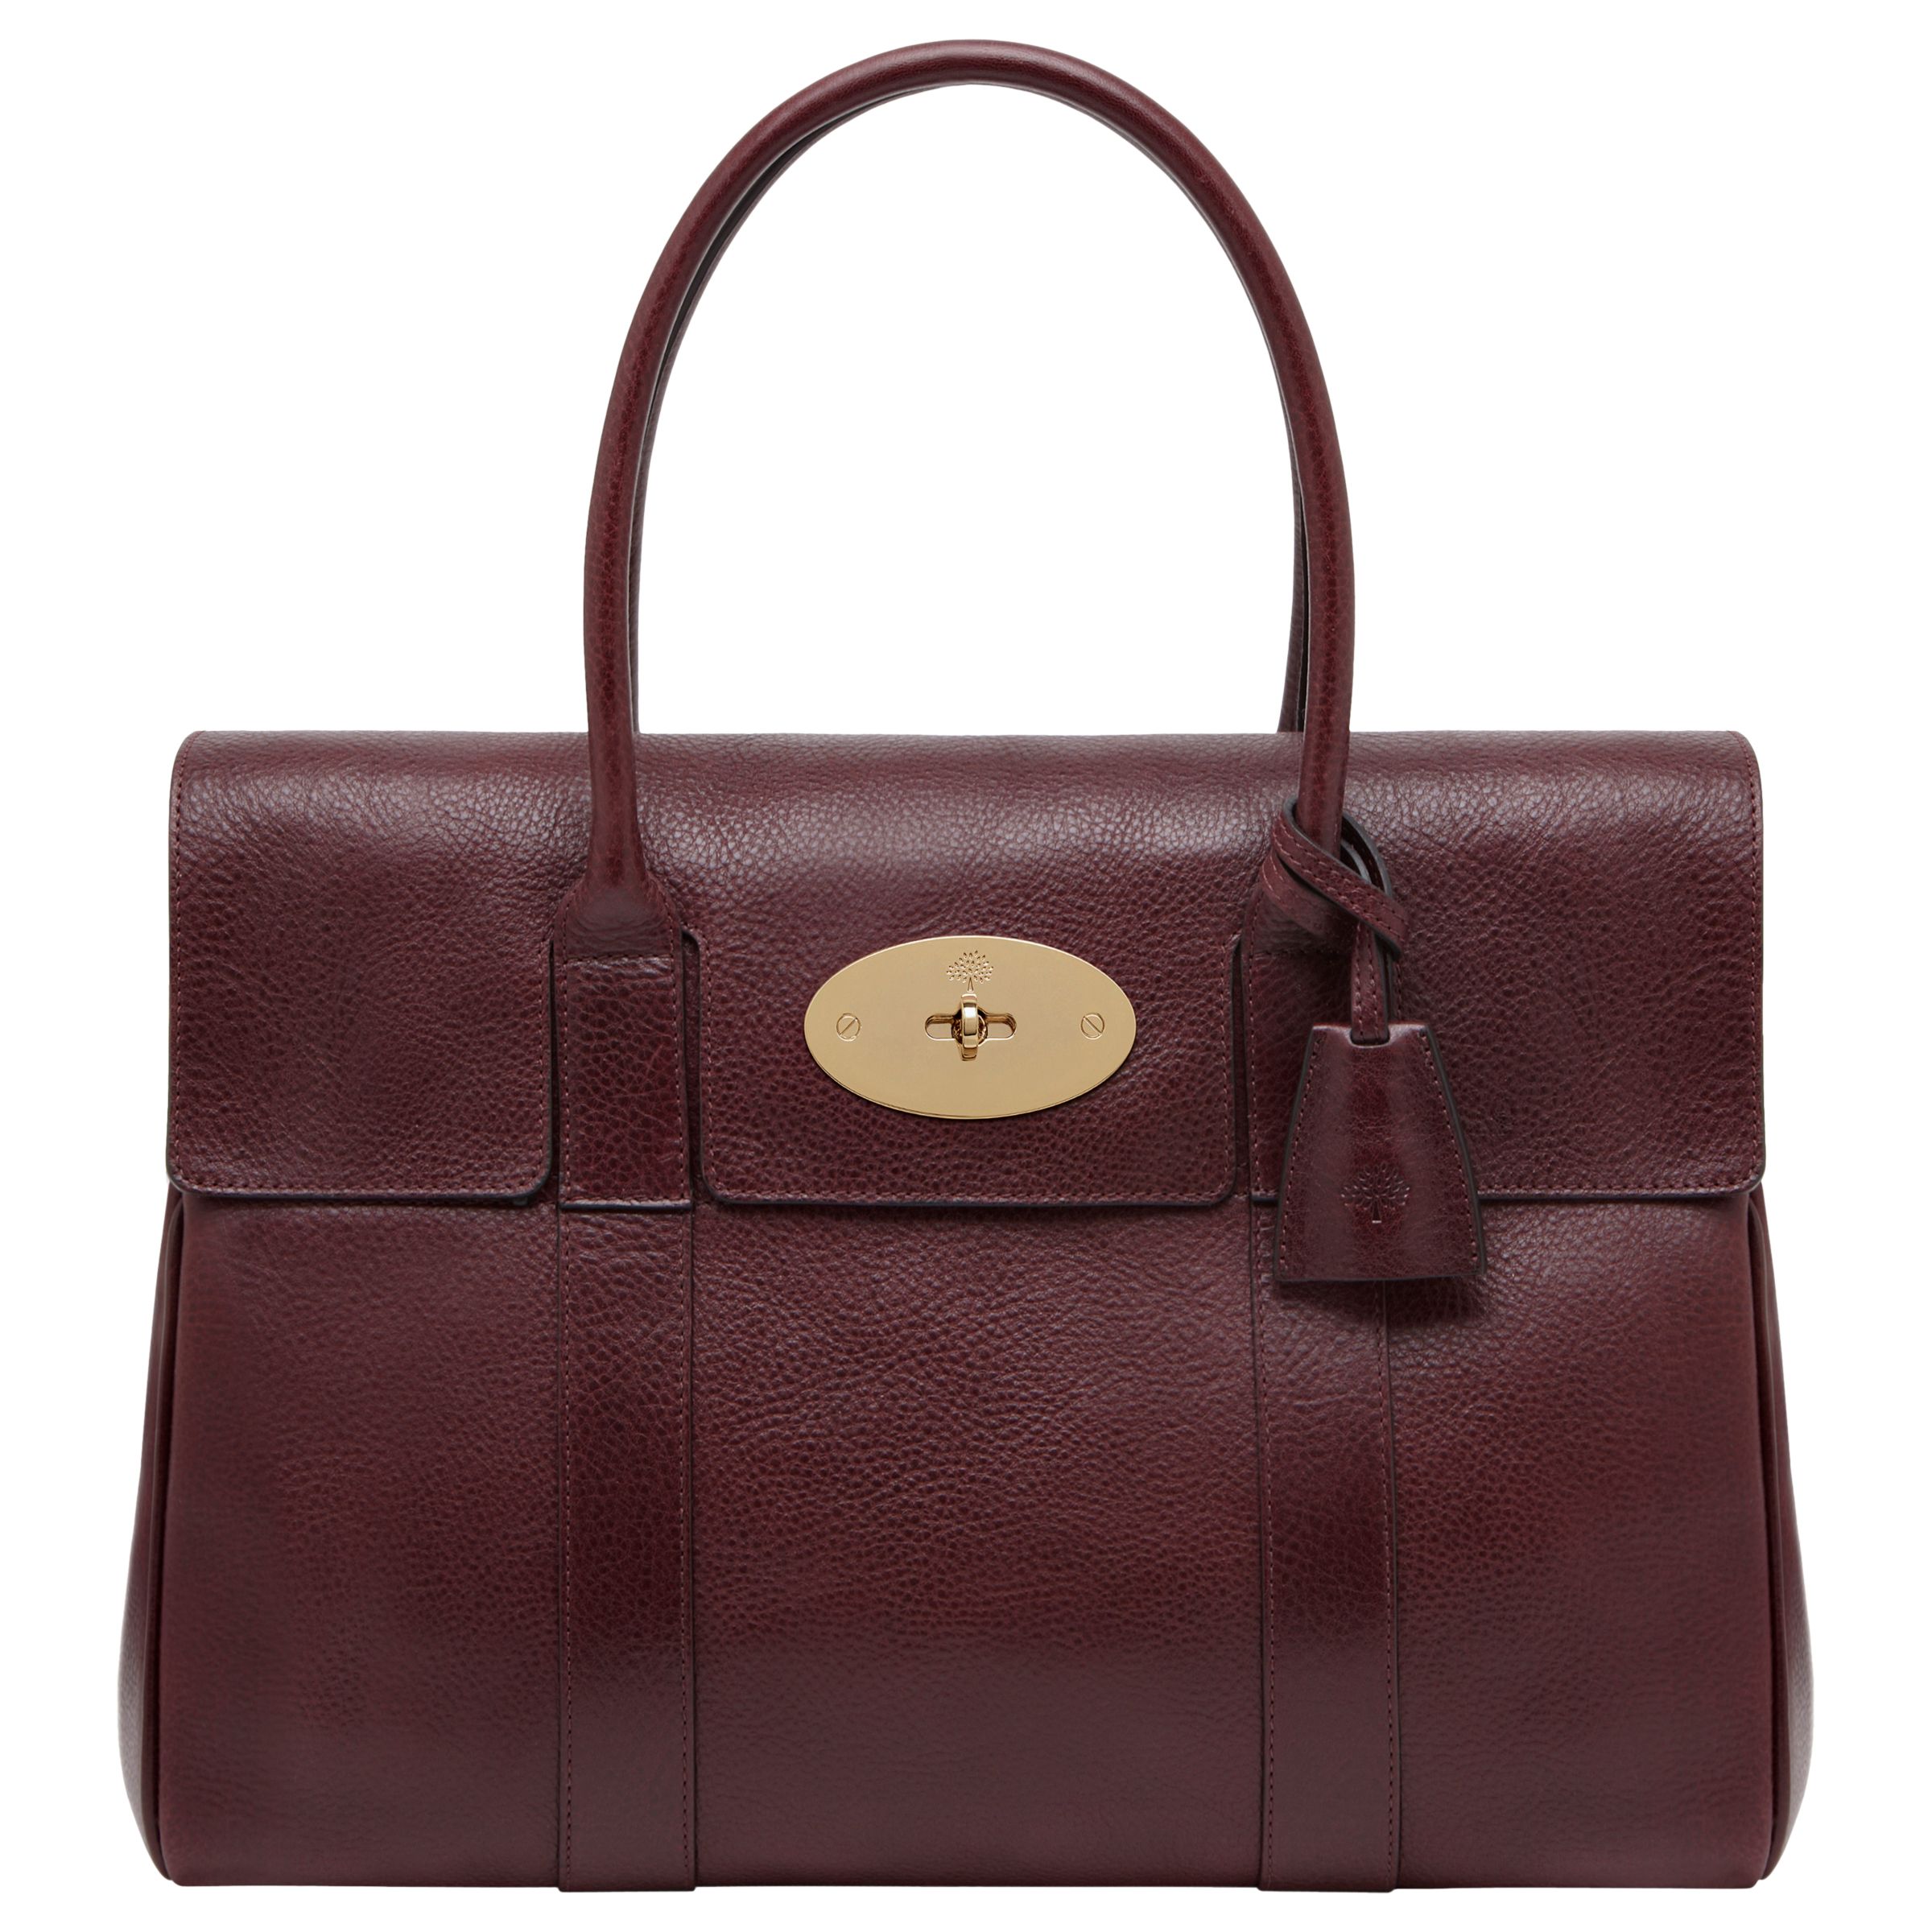 Mulberry Bayswater Coloured Veg Tanned Leather Grab Bag, Oxblood